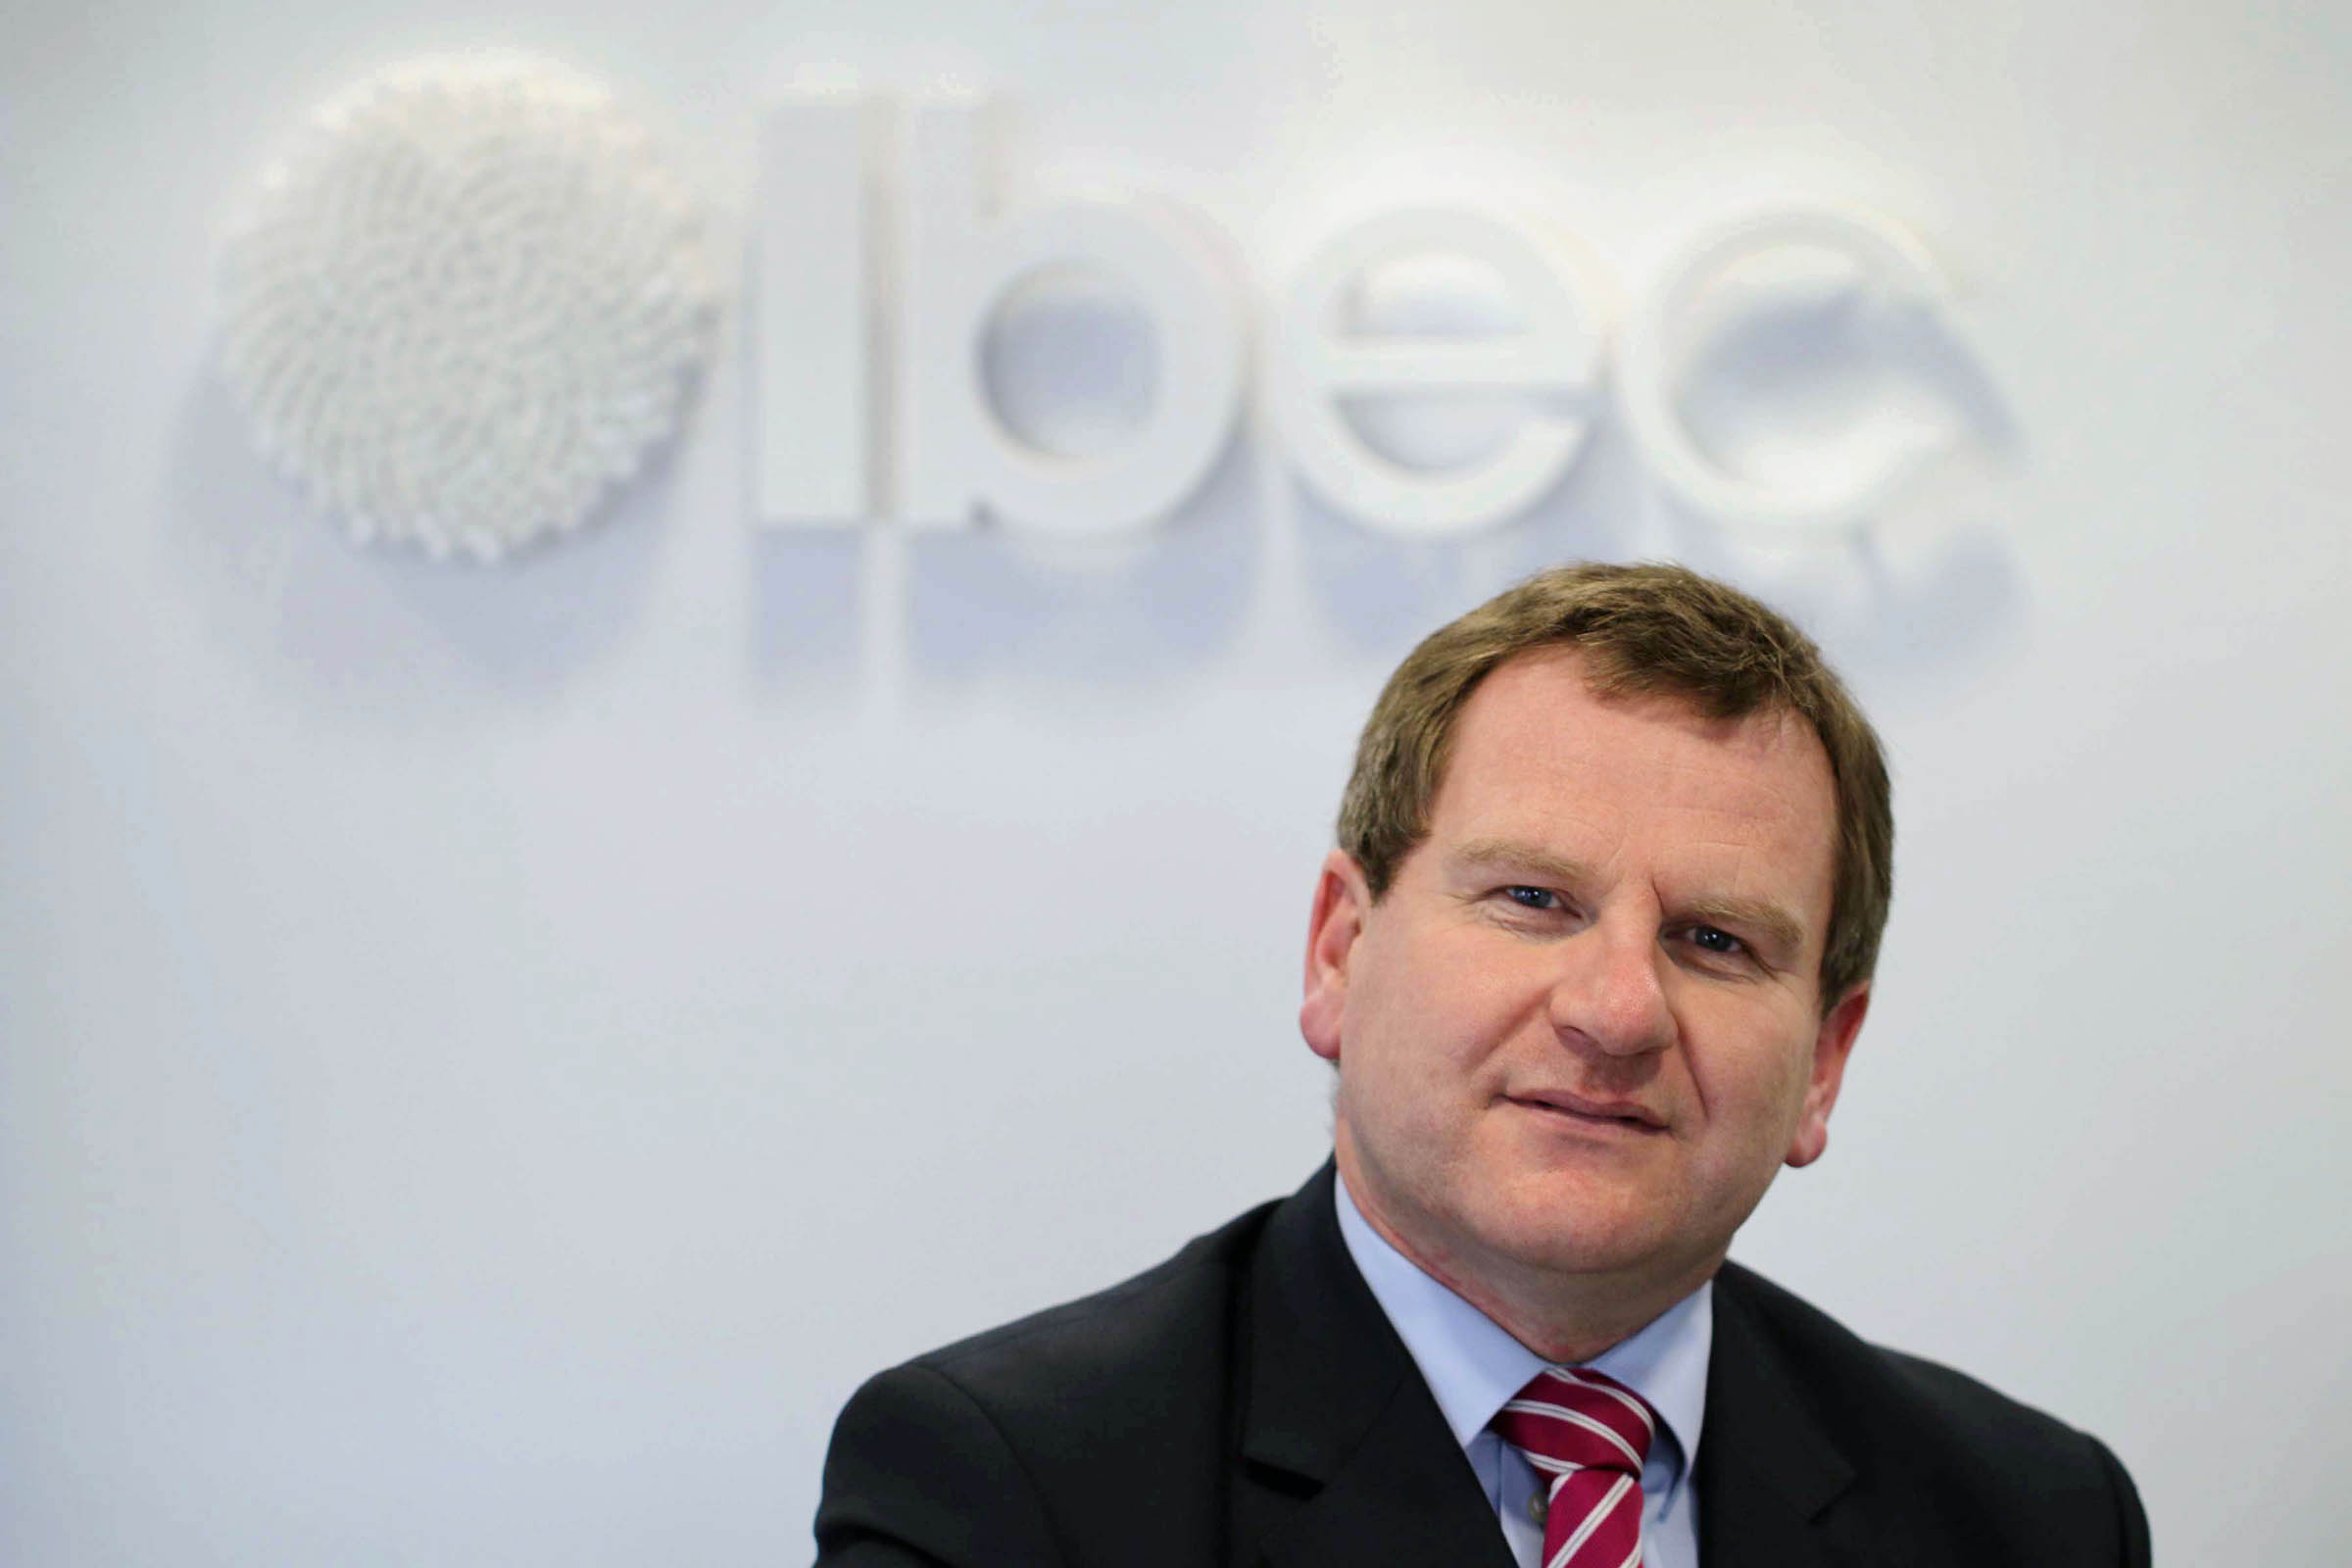 Ibec CEO to lead all-Ireland Brexit discussion